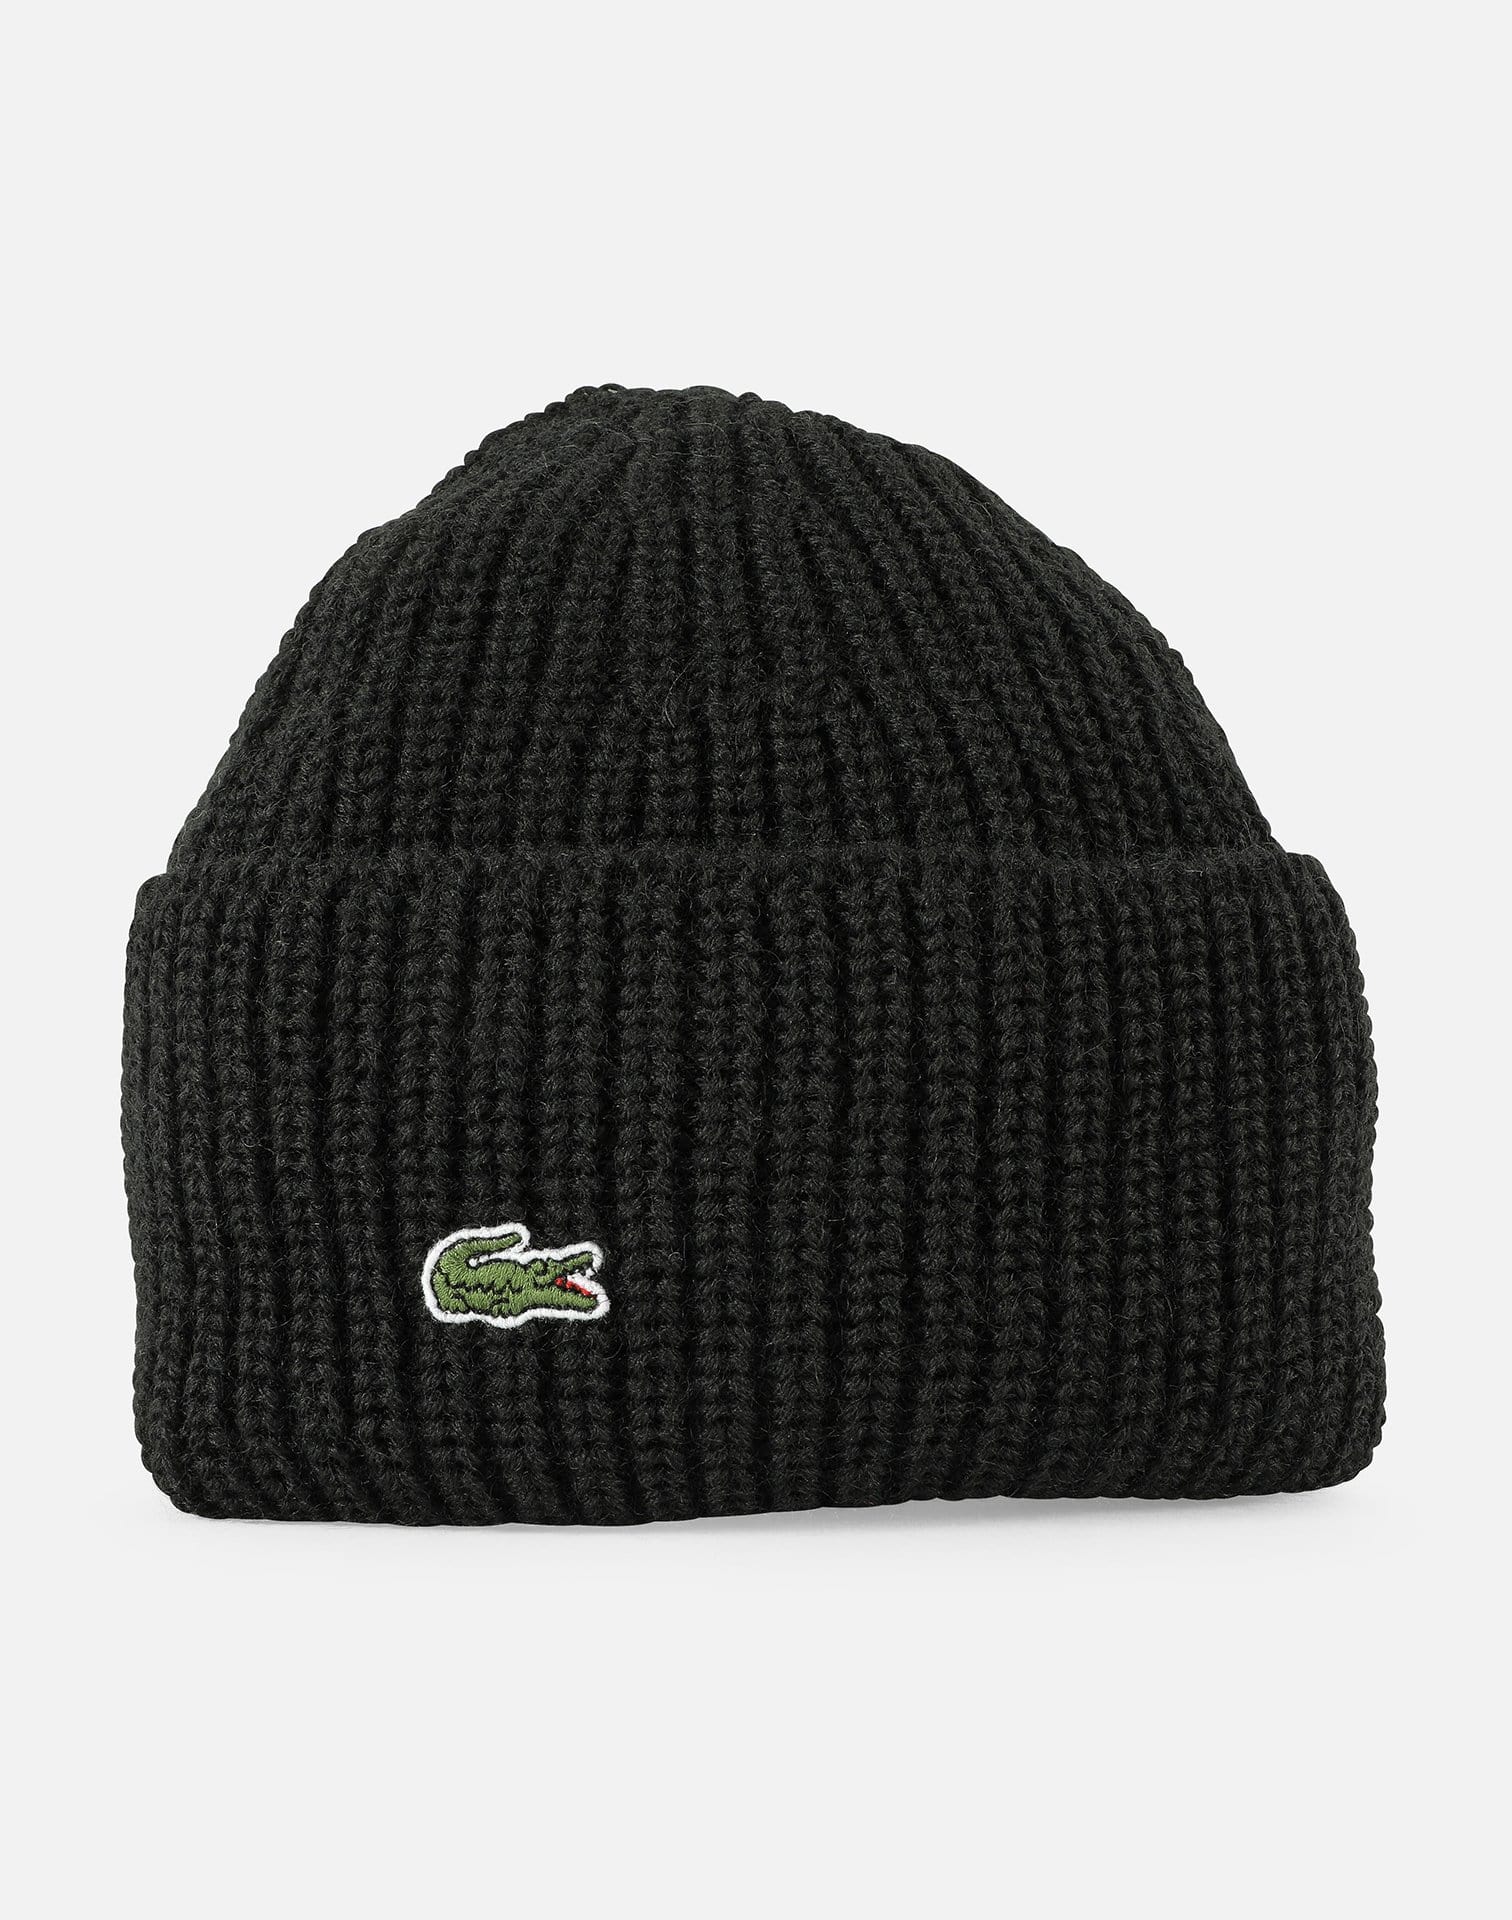 Lacoste Men's Turned Edge Ribbed Wool Beanie